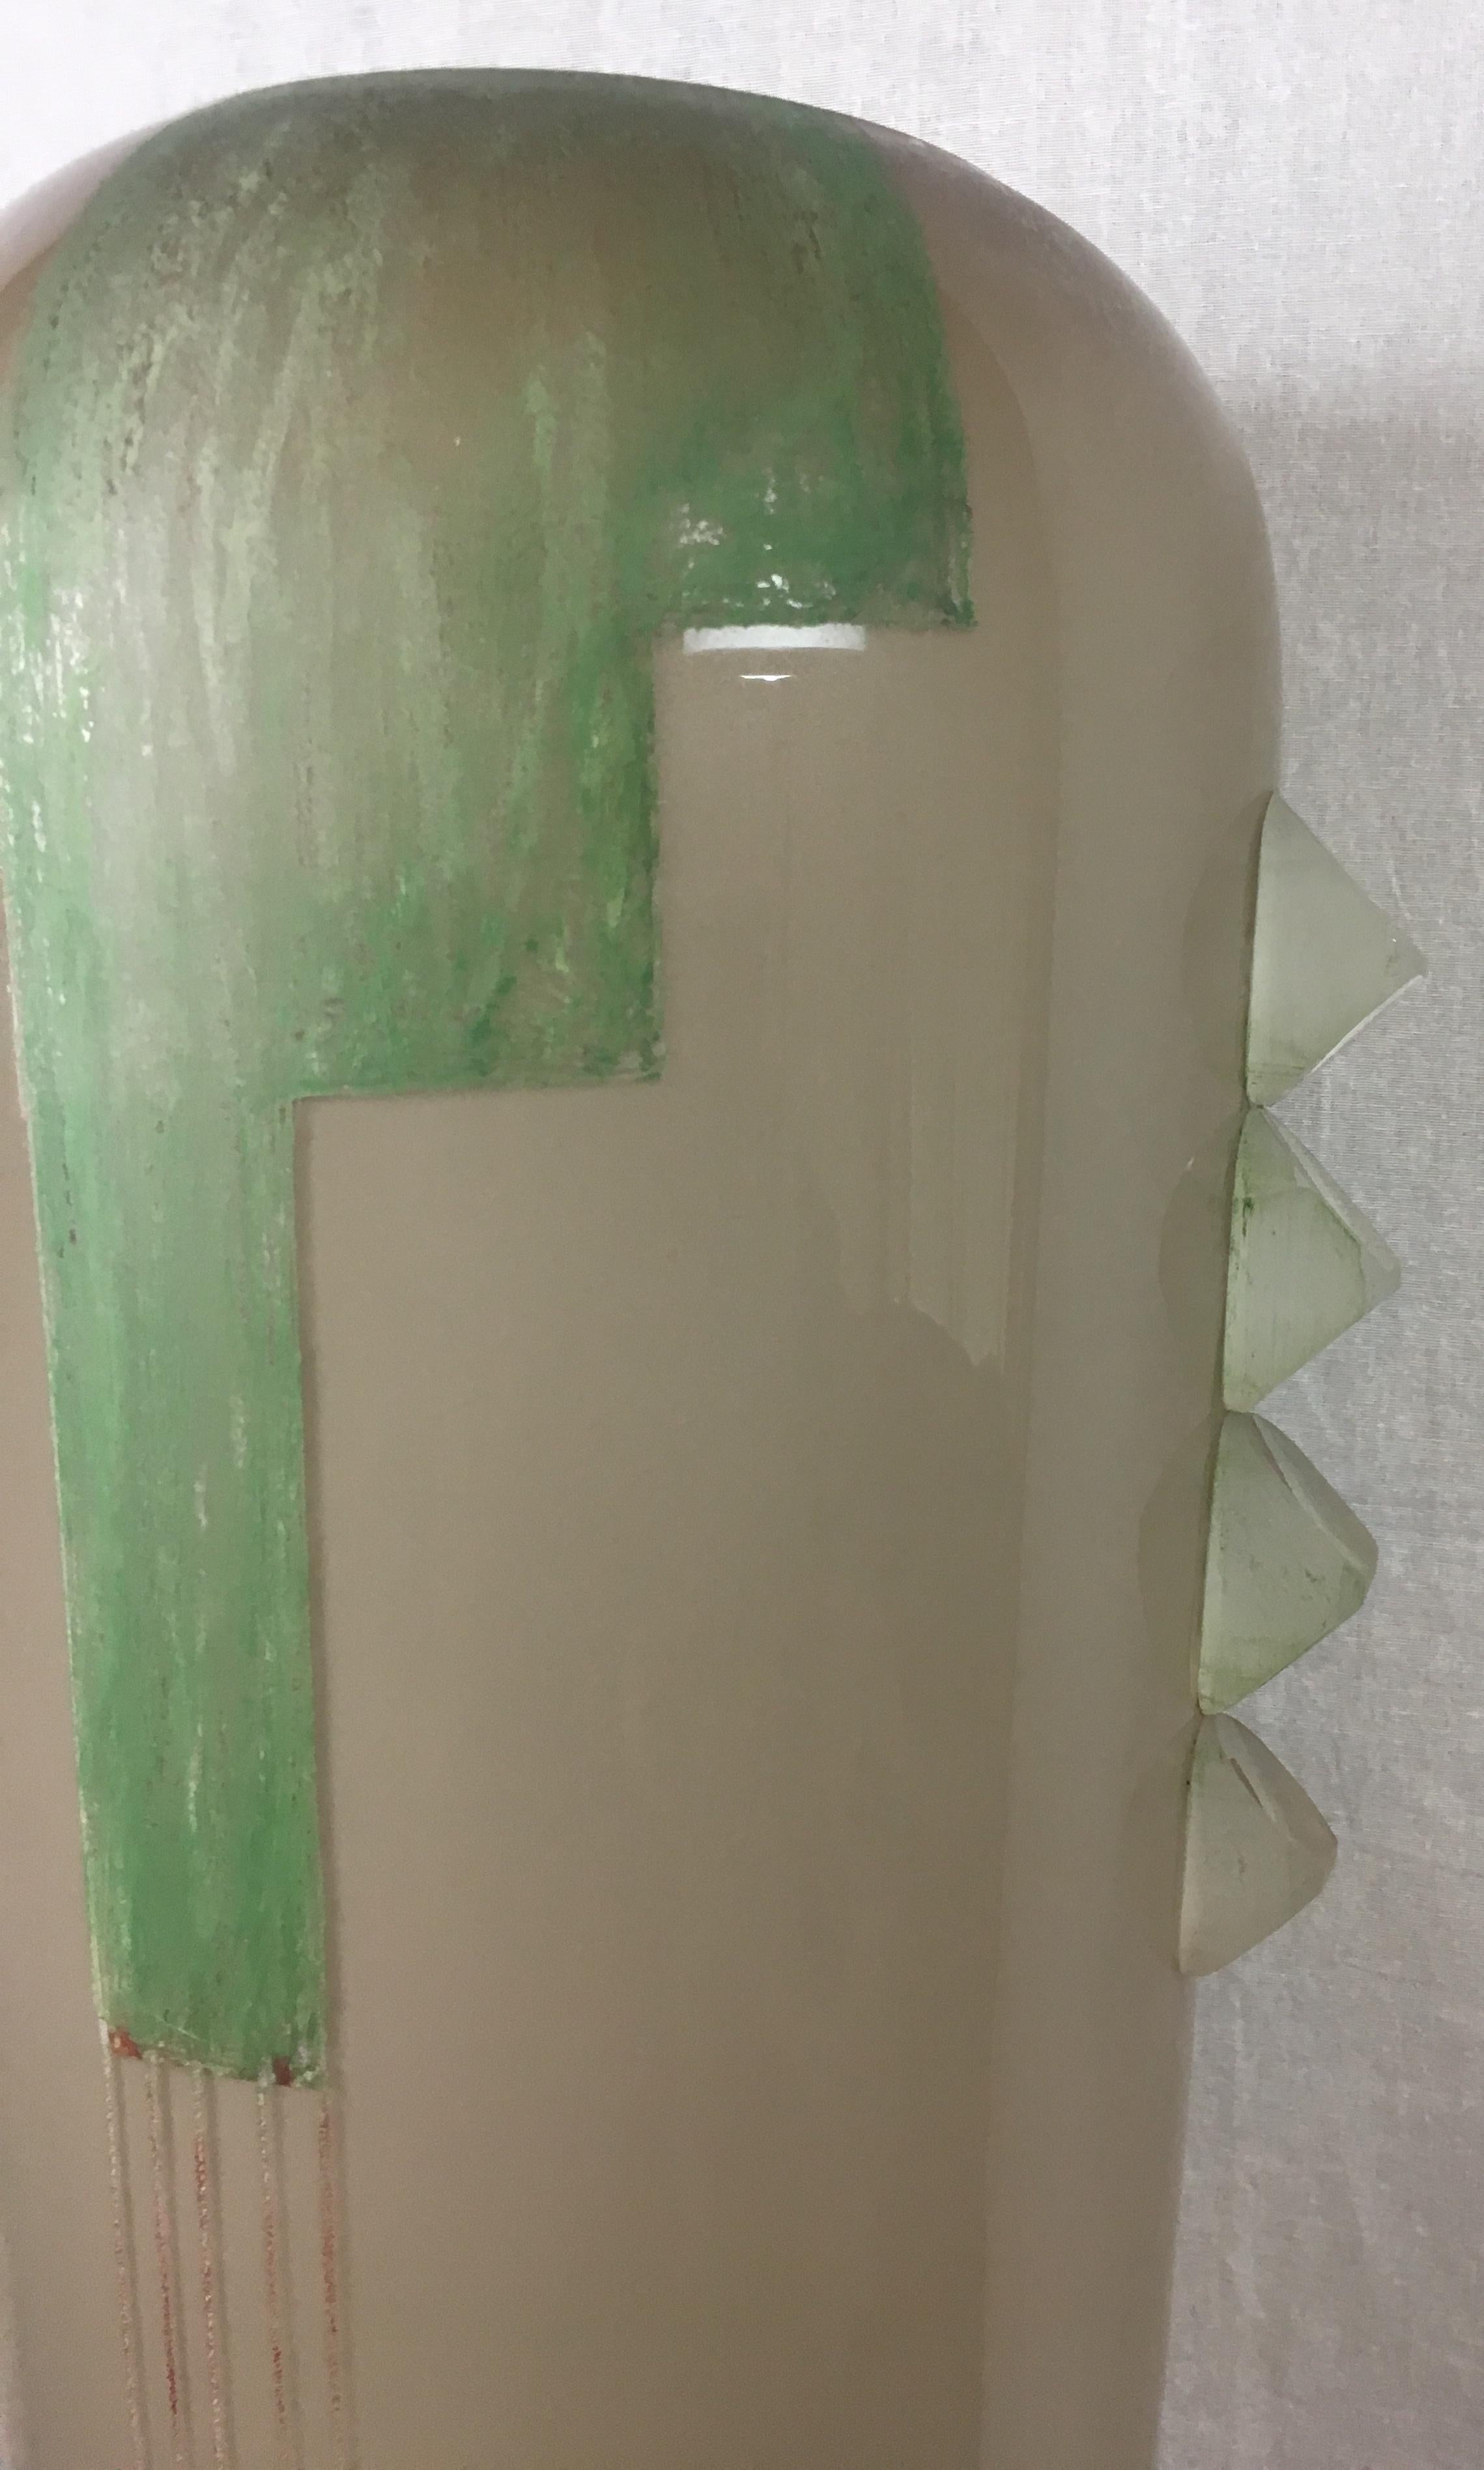 Etched Art Deco Cubist Glass Floor Vase by Anatole Riecke, from La Coupole Brasserie For Sale